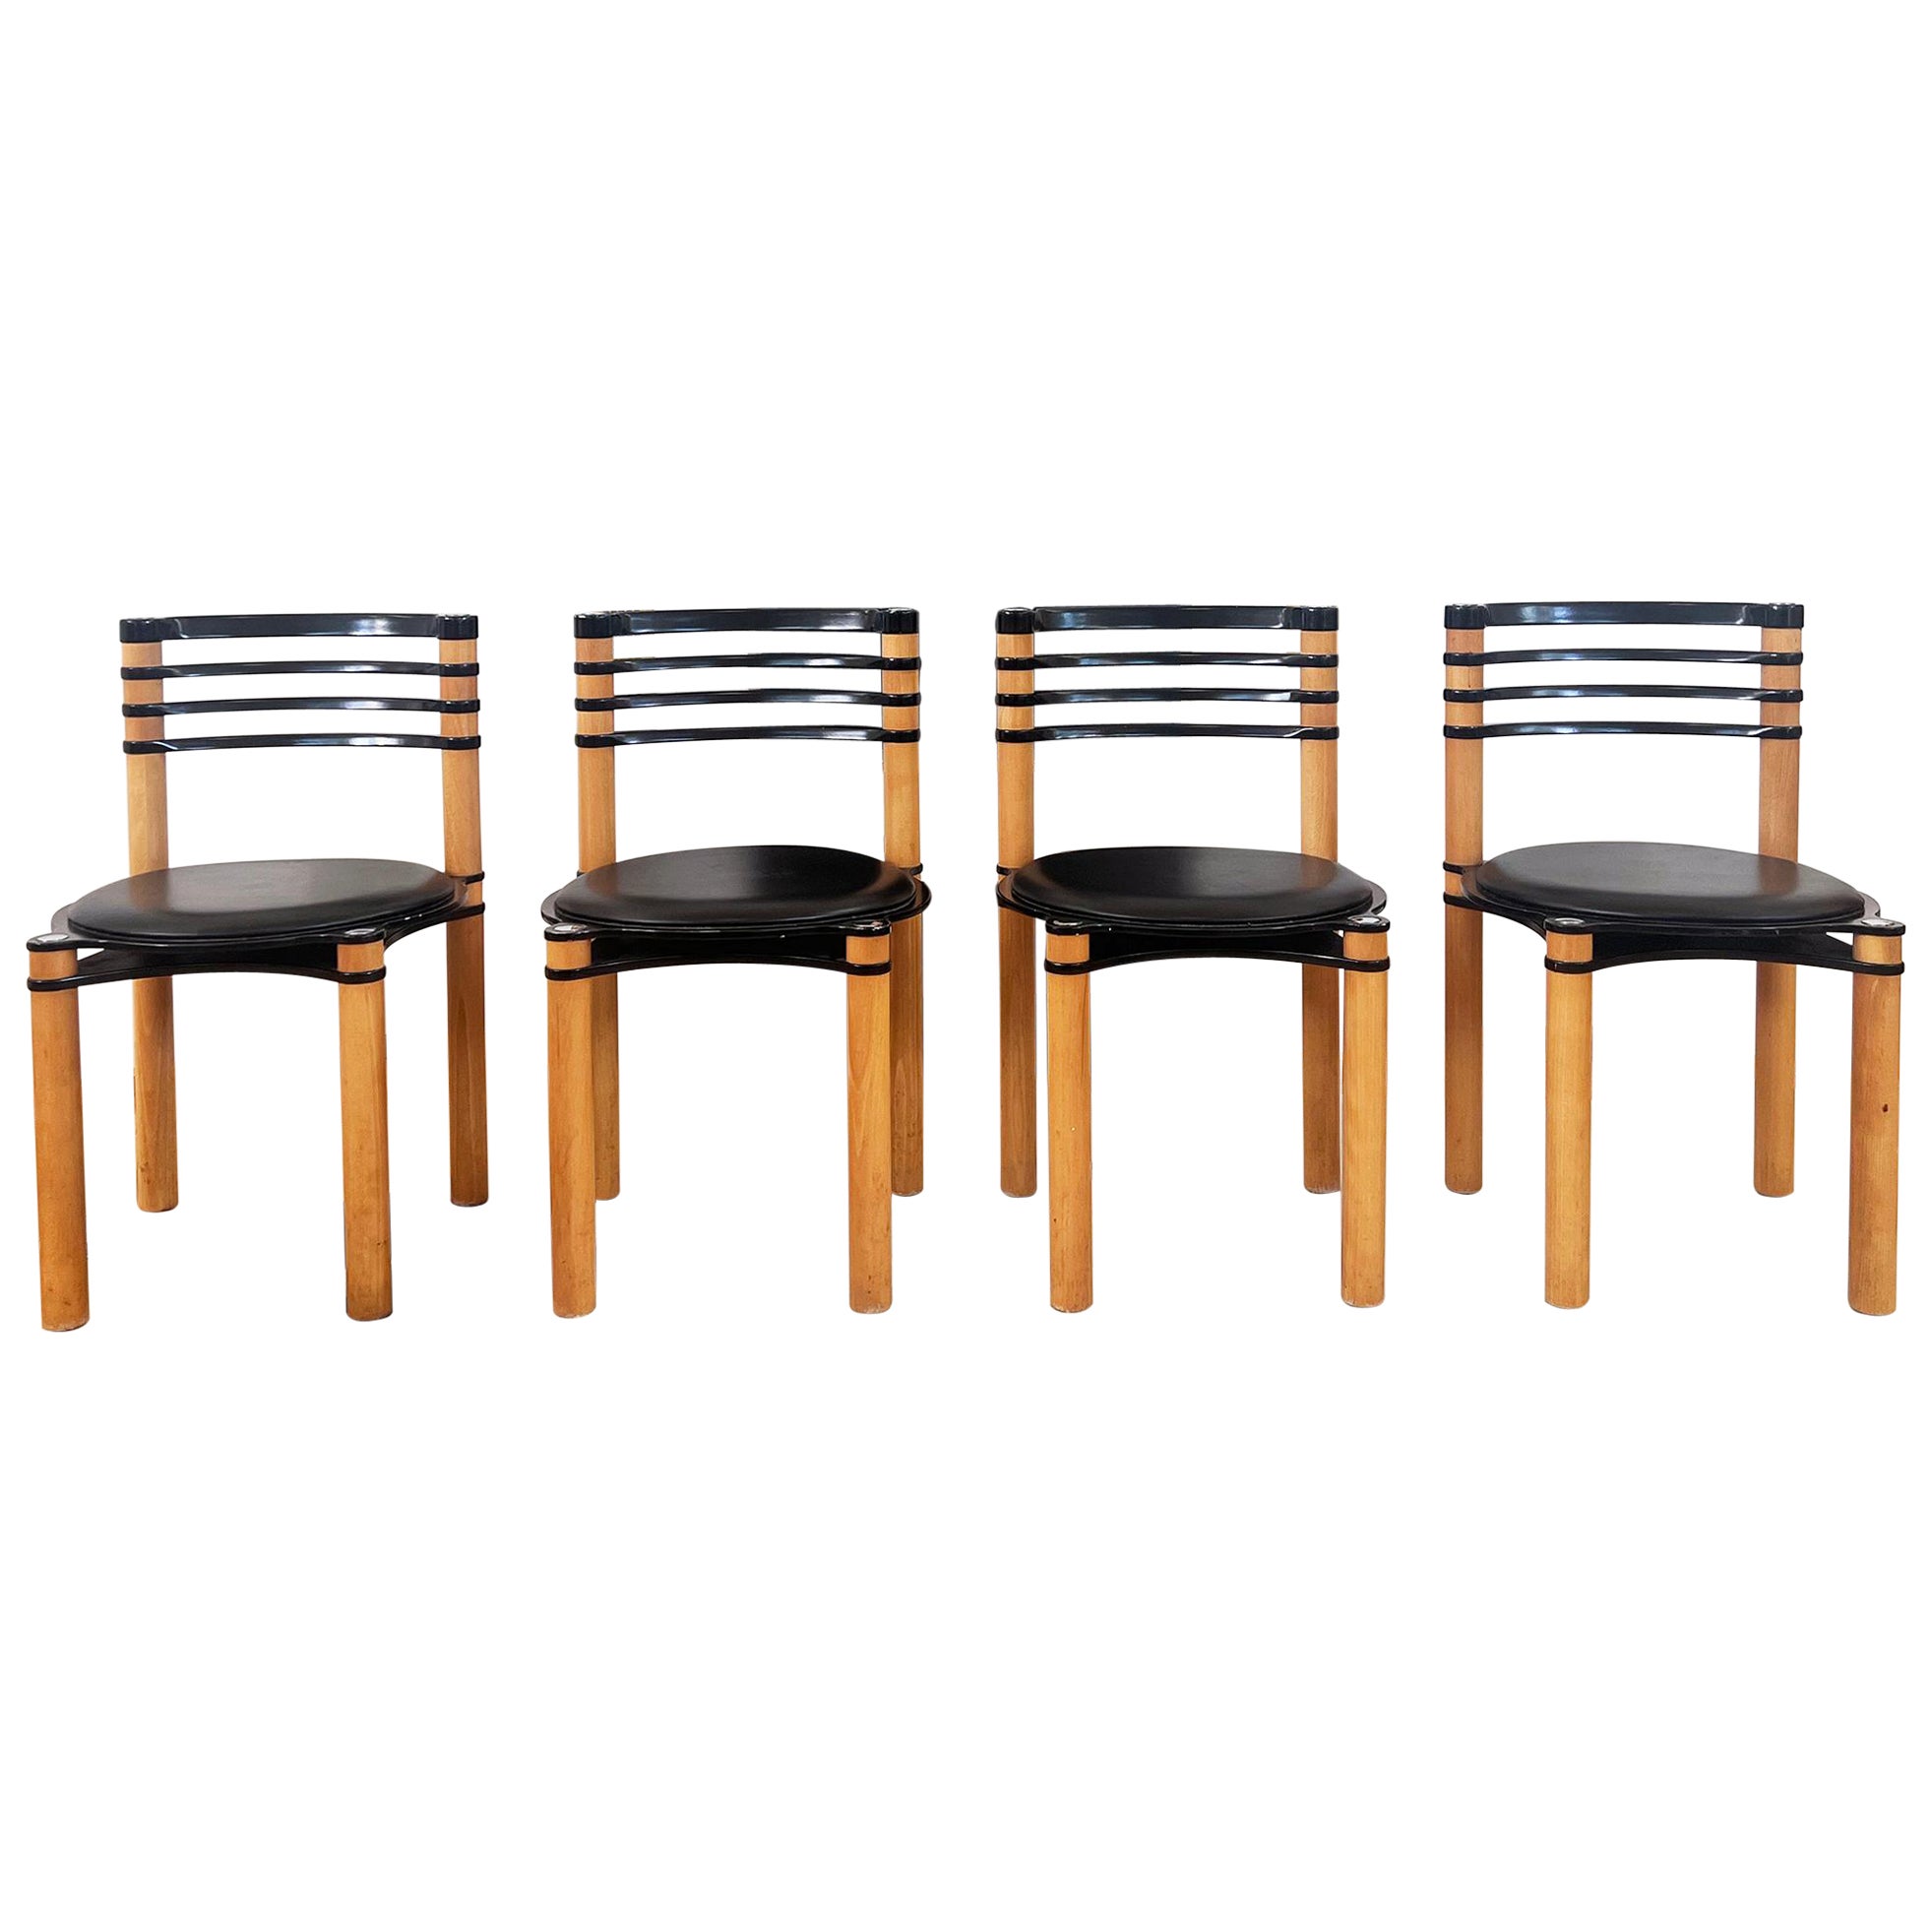 Set of 4 Postmodern Black and Wood Chairs by Kurt Thut for Dietiker, 1980s For Sale